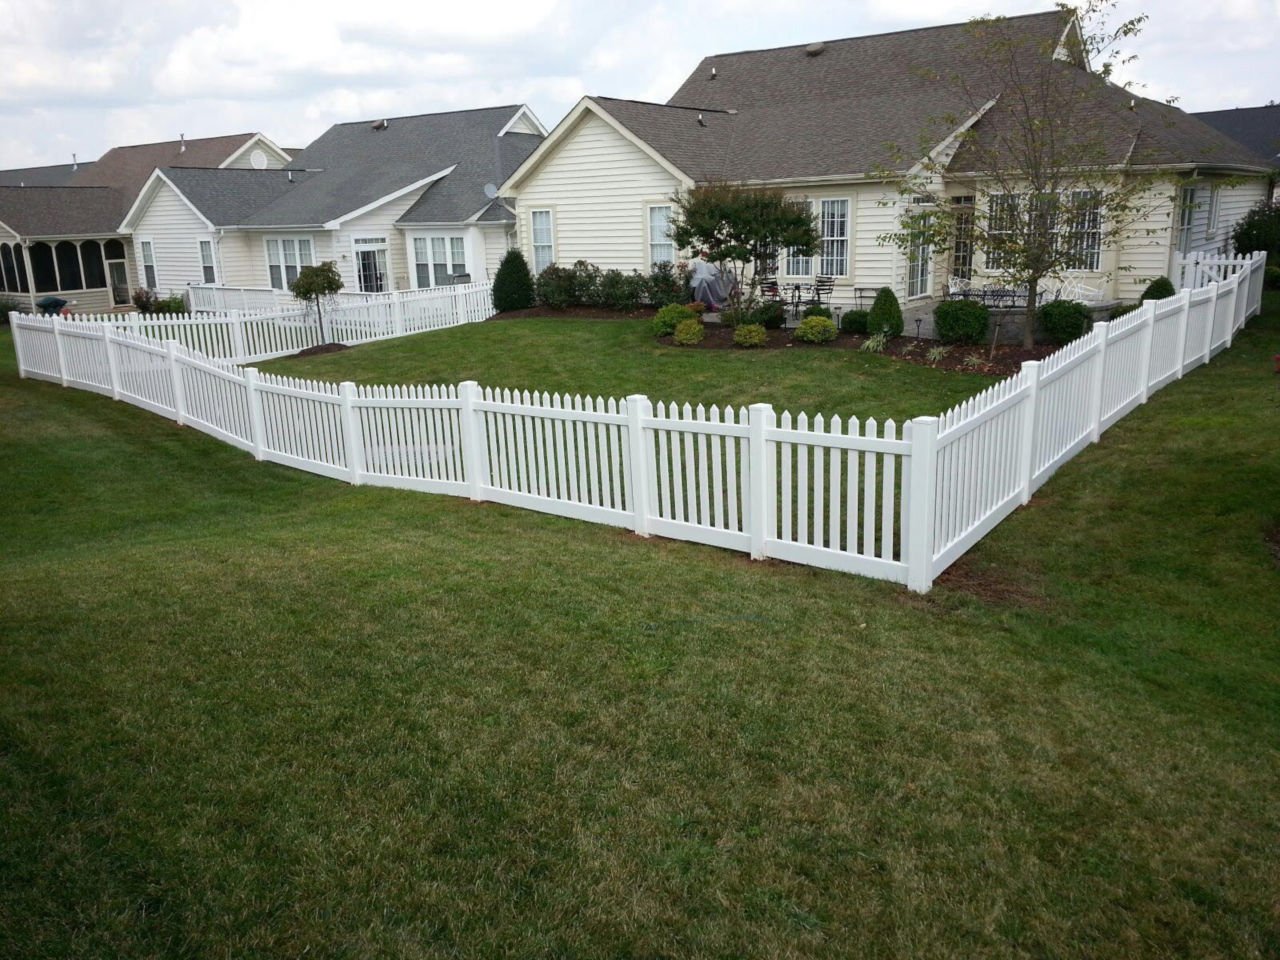 Beitzell Fence - White Vinyl Fence Beitzell Fence Co. Gainesville (703)691-5891